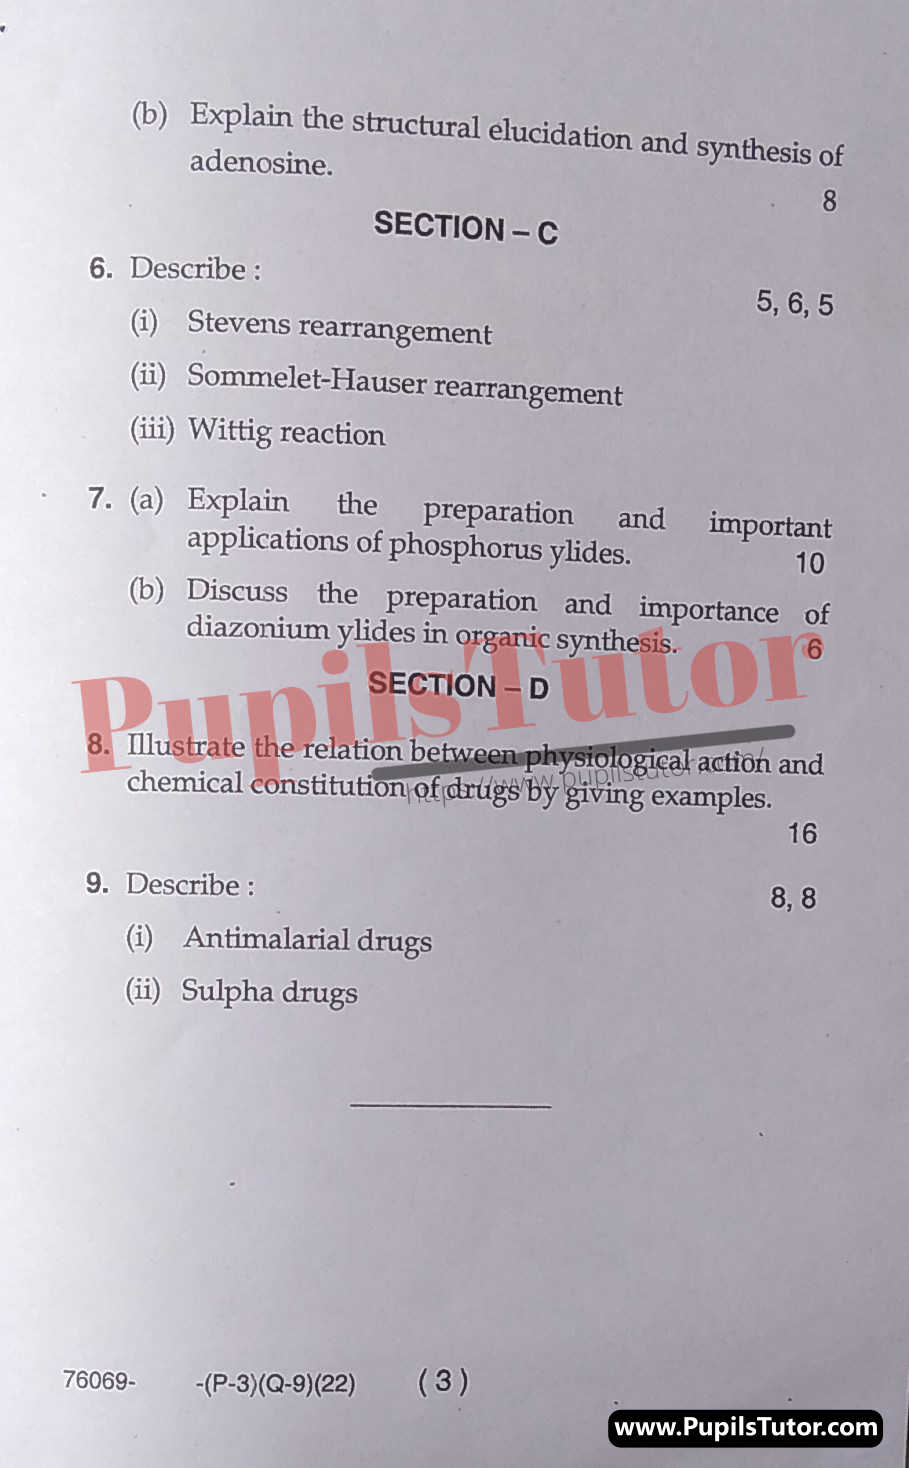 Free Download PDF Of M.D. University M.Sc. [Chemistry] Third Semester Latest Question Paper For Organic Special-III Subject (Page 3) - https://www.pupilstutor.com